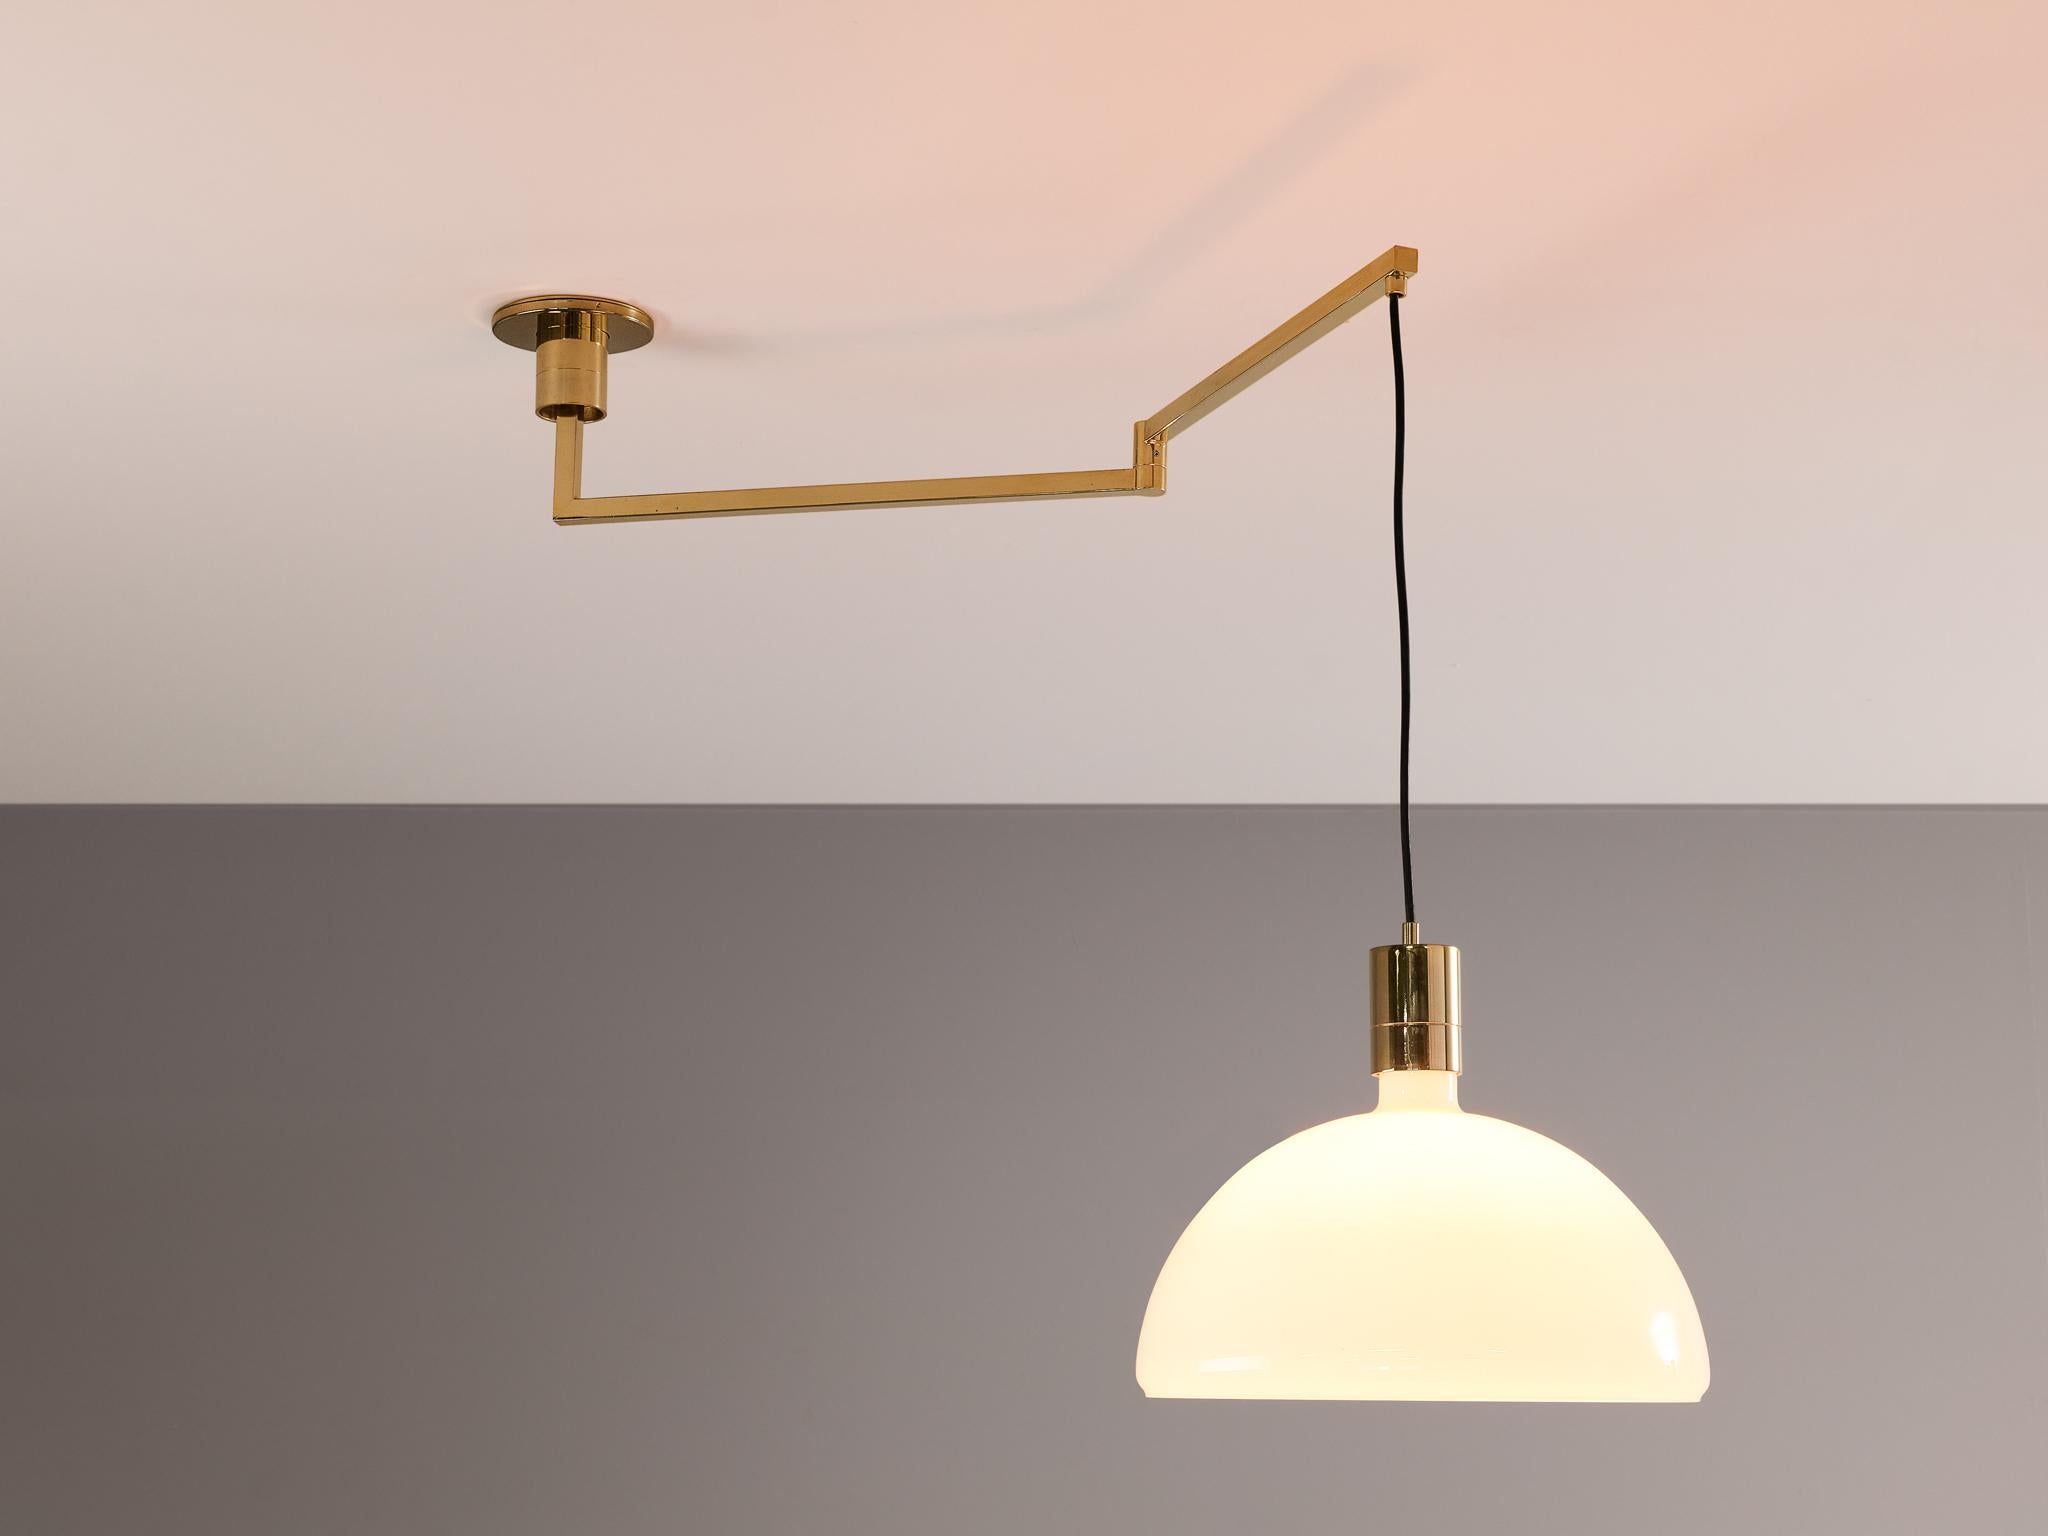 Franco Albini, Franc Helg and Antonio Piva for Sirrah, brass, opaline glass, Italy, design 1969

This well-constructed pendant lamp is part of a series named ‘AM/AS’ that included table, wall, ceiling and suspension lamps, and were designed by an